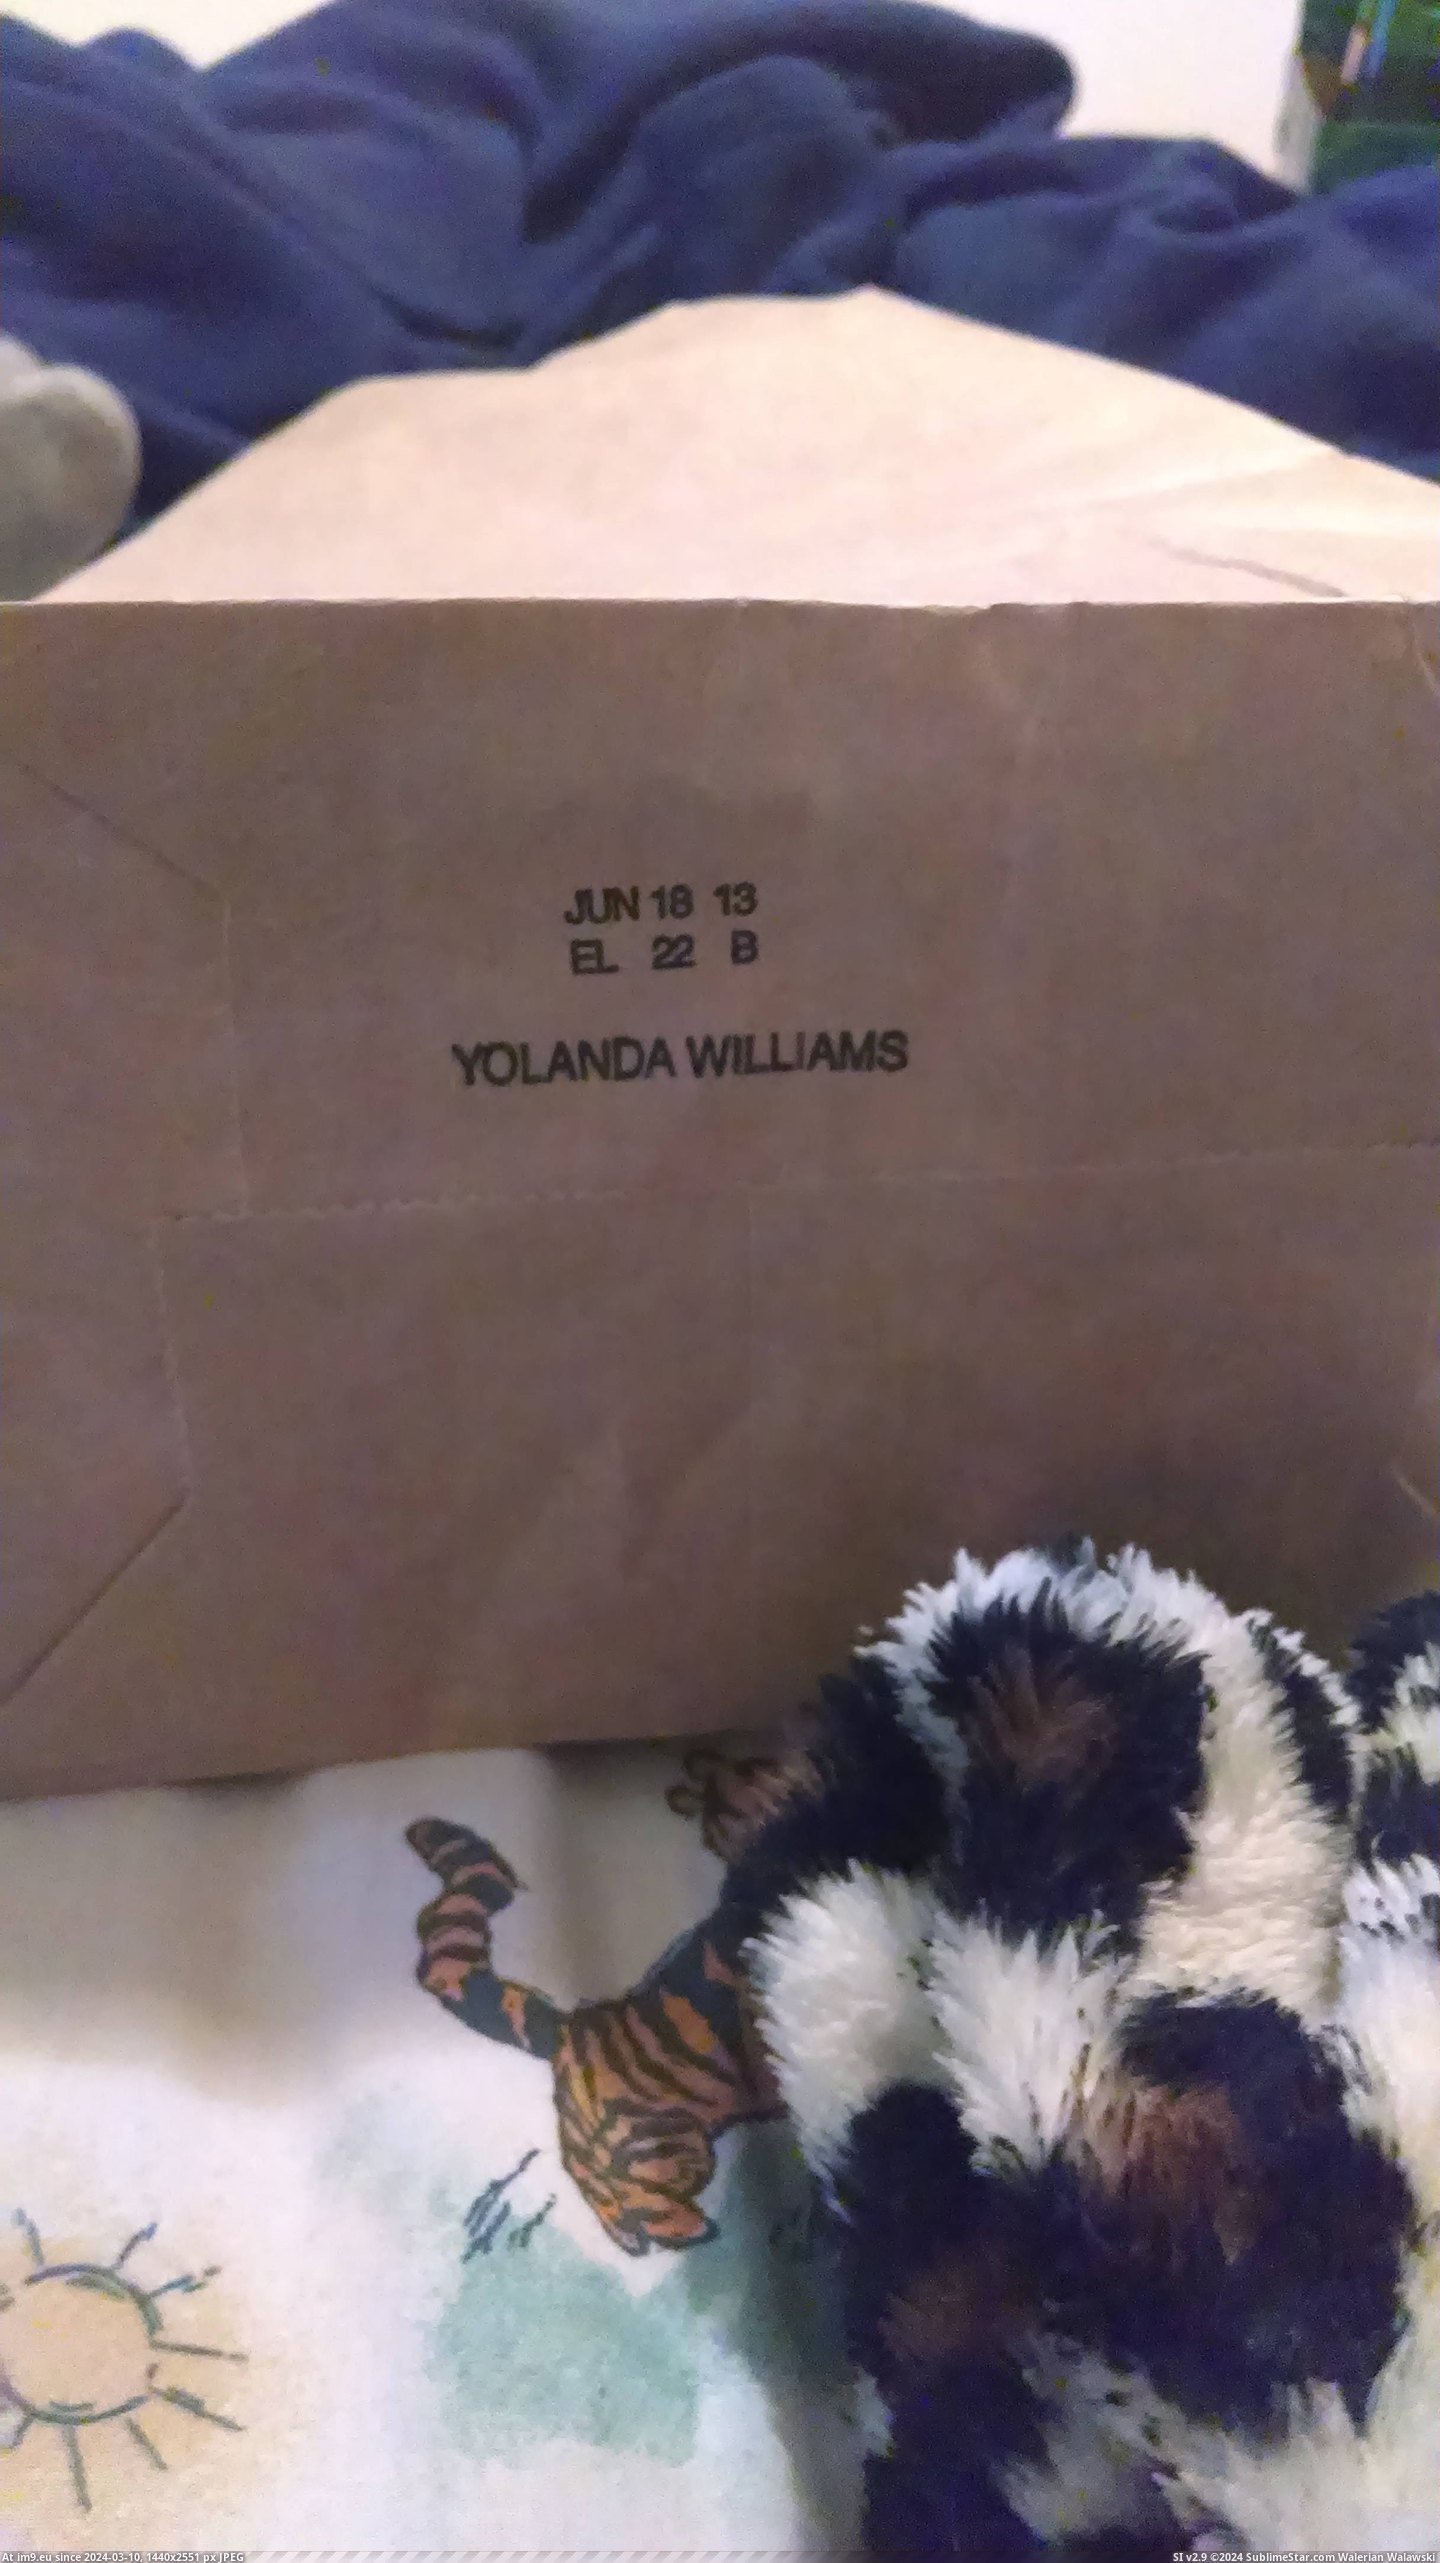 #Had #Store #Liquor #Bag #Printed [Mildlyinteresting] My bag from the liquor store had a name and date printed on it Pic. (Изображение из альбом My r/MILDLYINTERESTING favs))